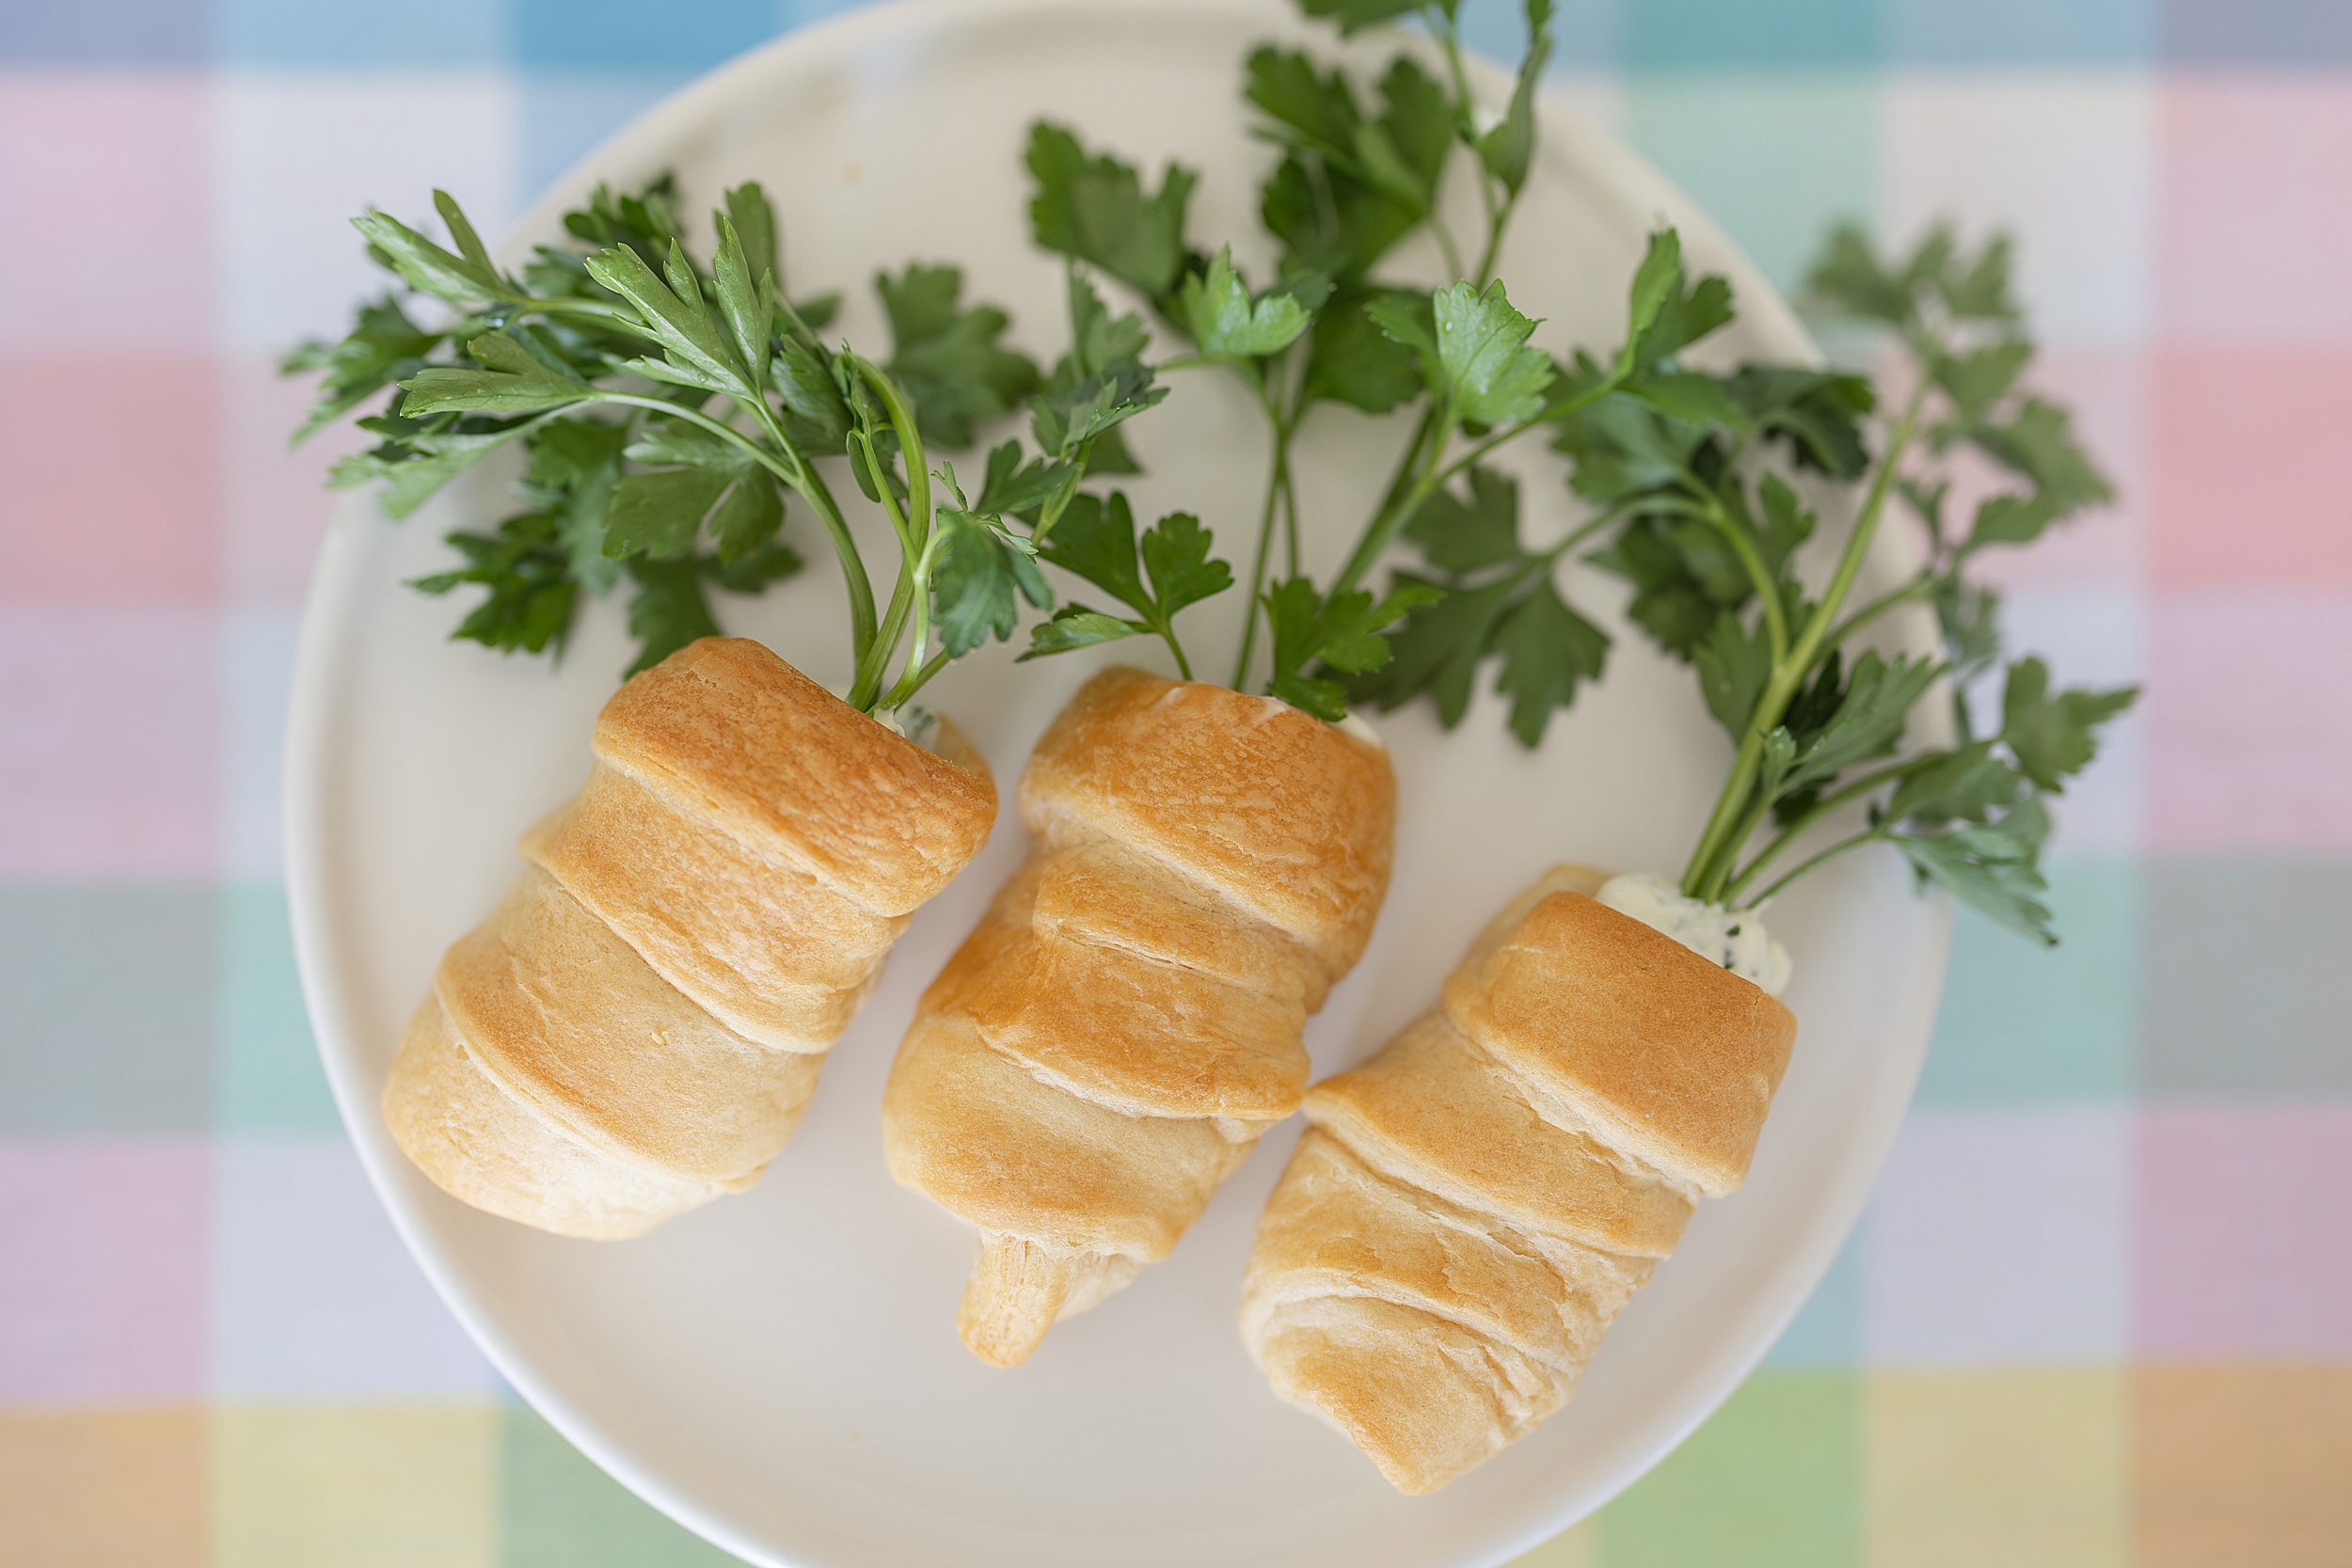 Easter recipe of Pillsbury crescent rolls baked to look like carrots.